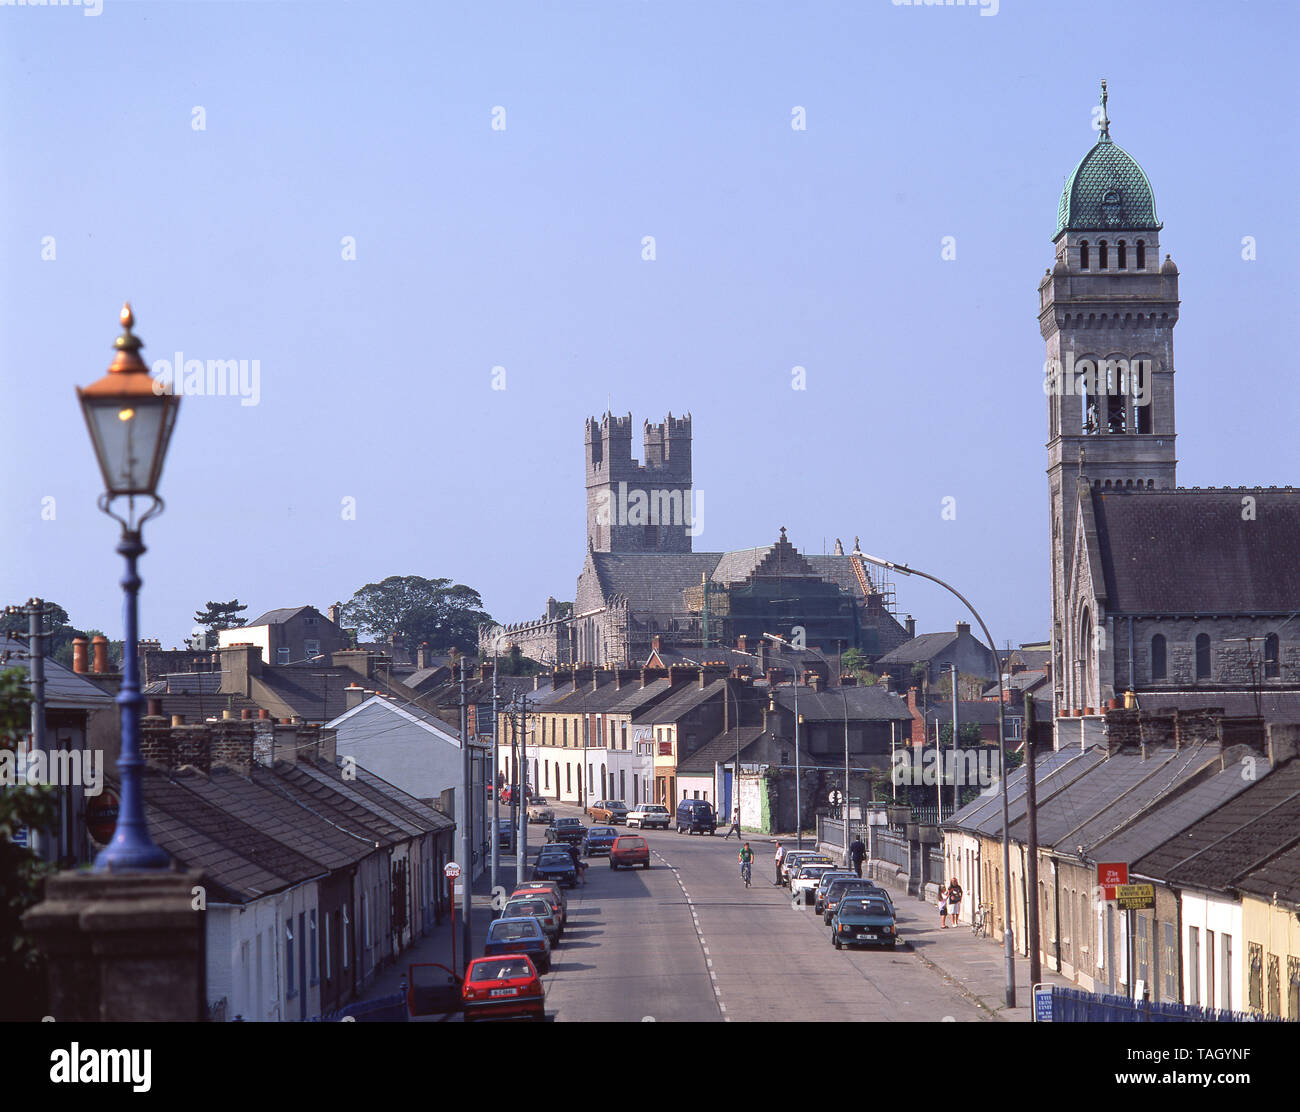 View of town, Limerick, County Limerick, Republic of Ireland Stock Photo